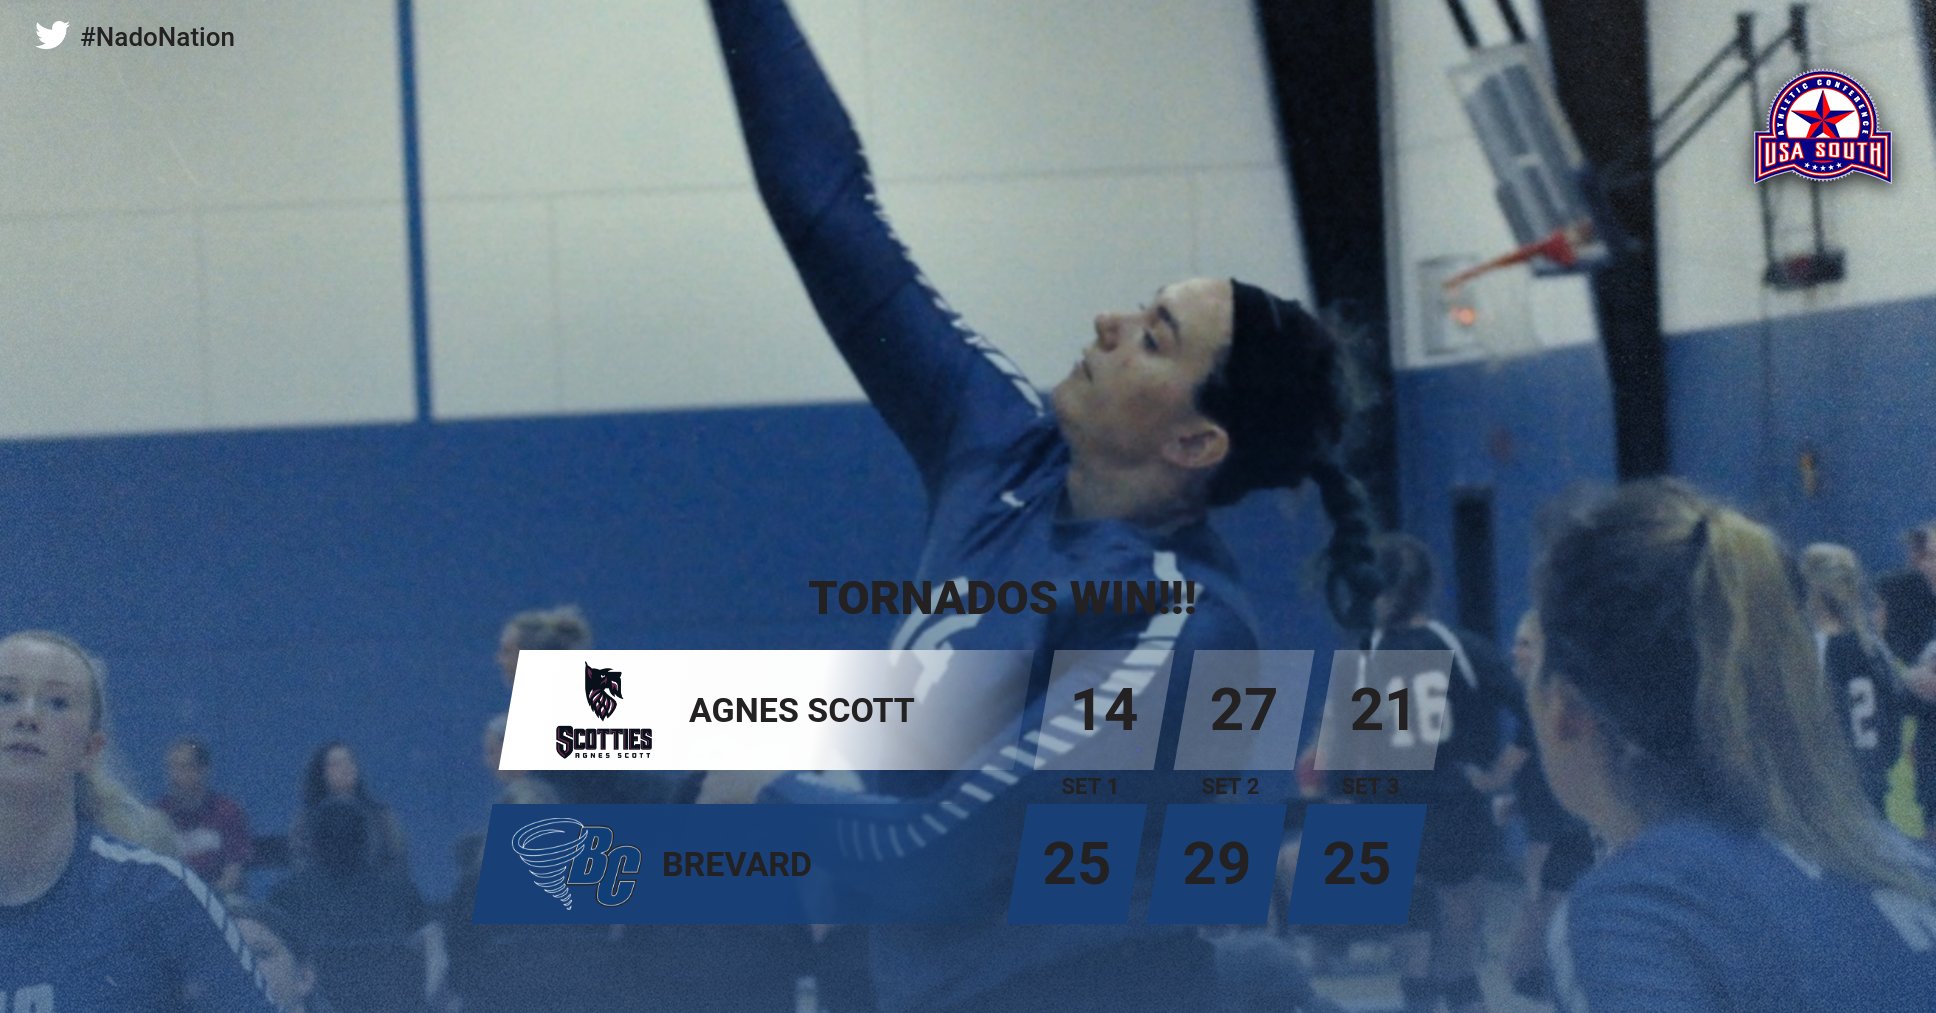 Brevard Records Second Win in Last Four Matches with Sweep over Agnes Scott